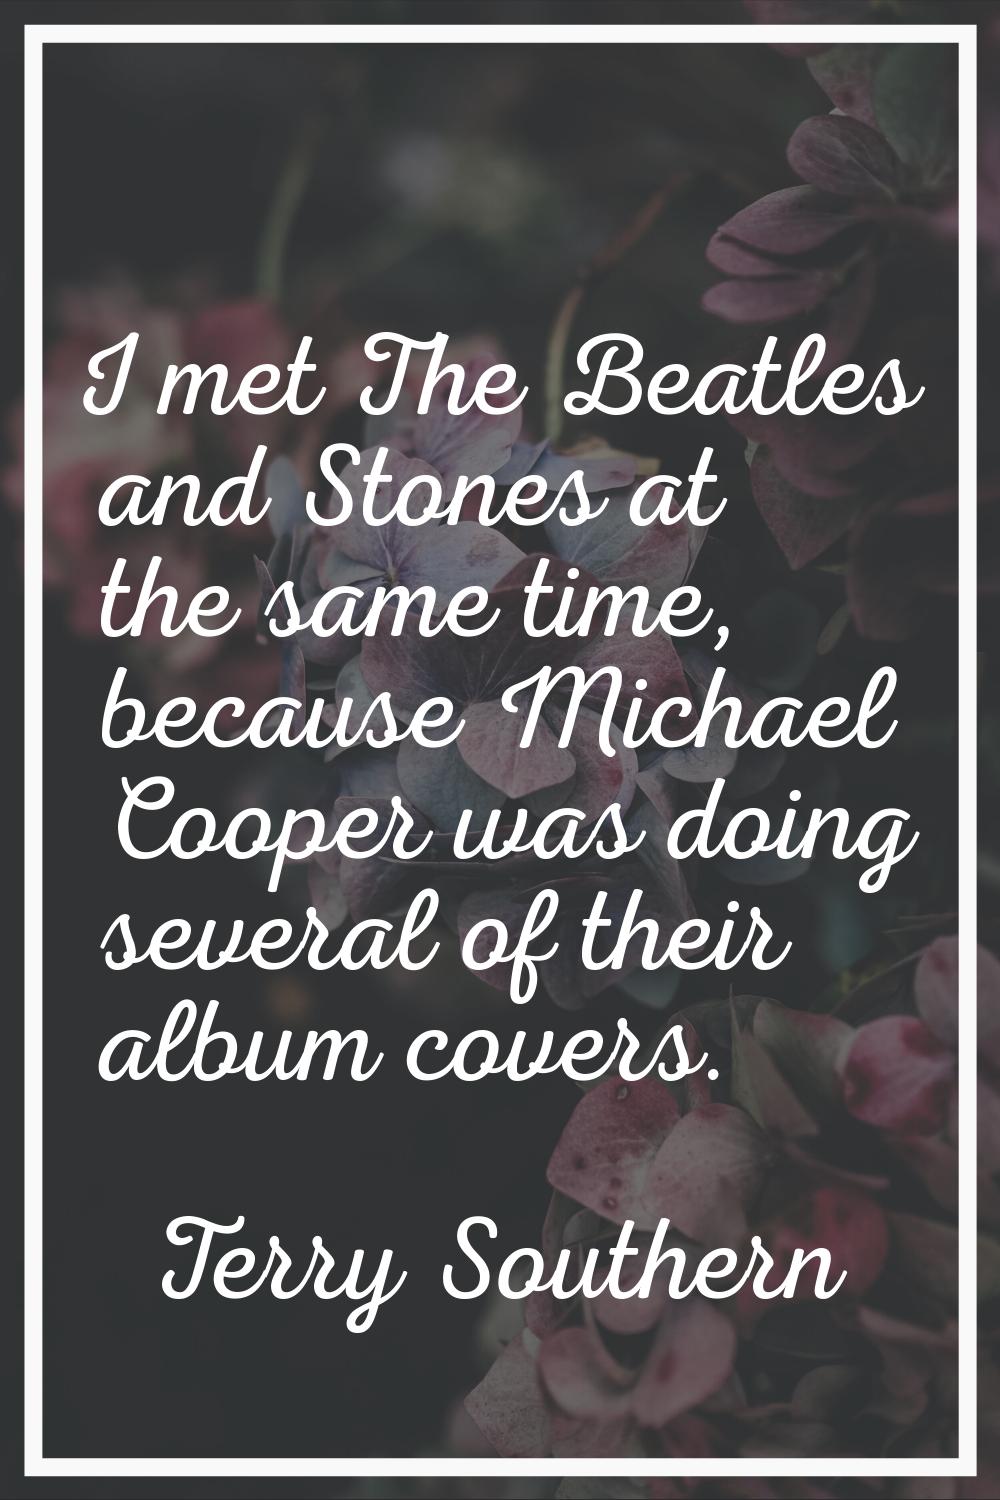 I met The Beatles and Stones at the same time, because Michael Cooper was doing several of their al